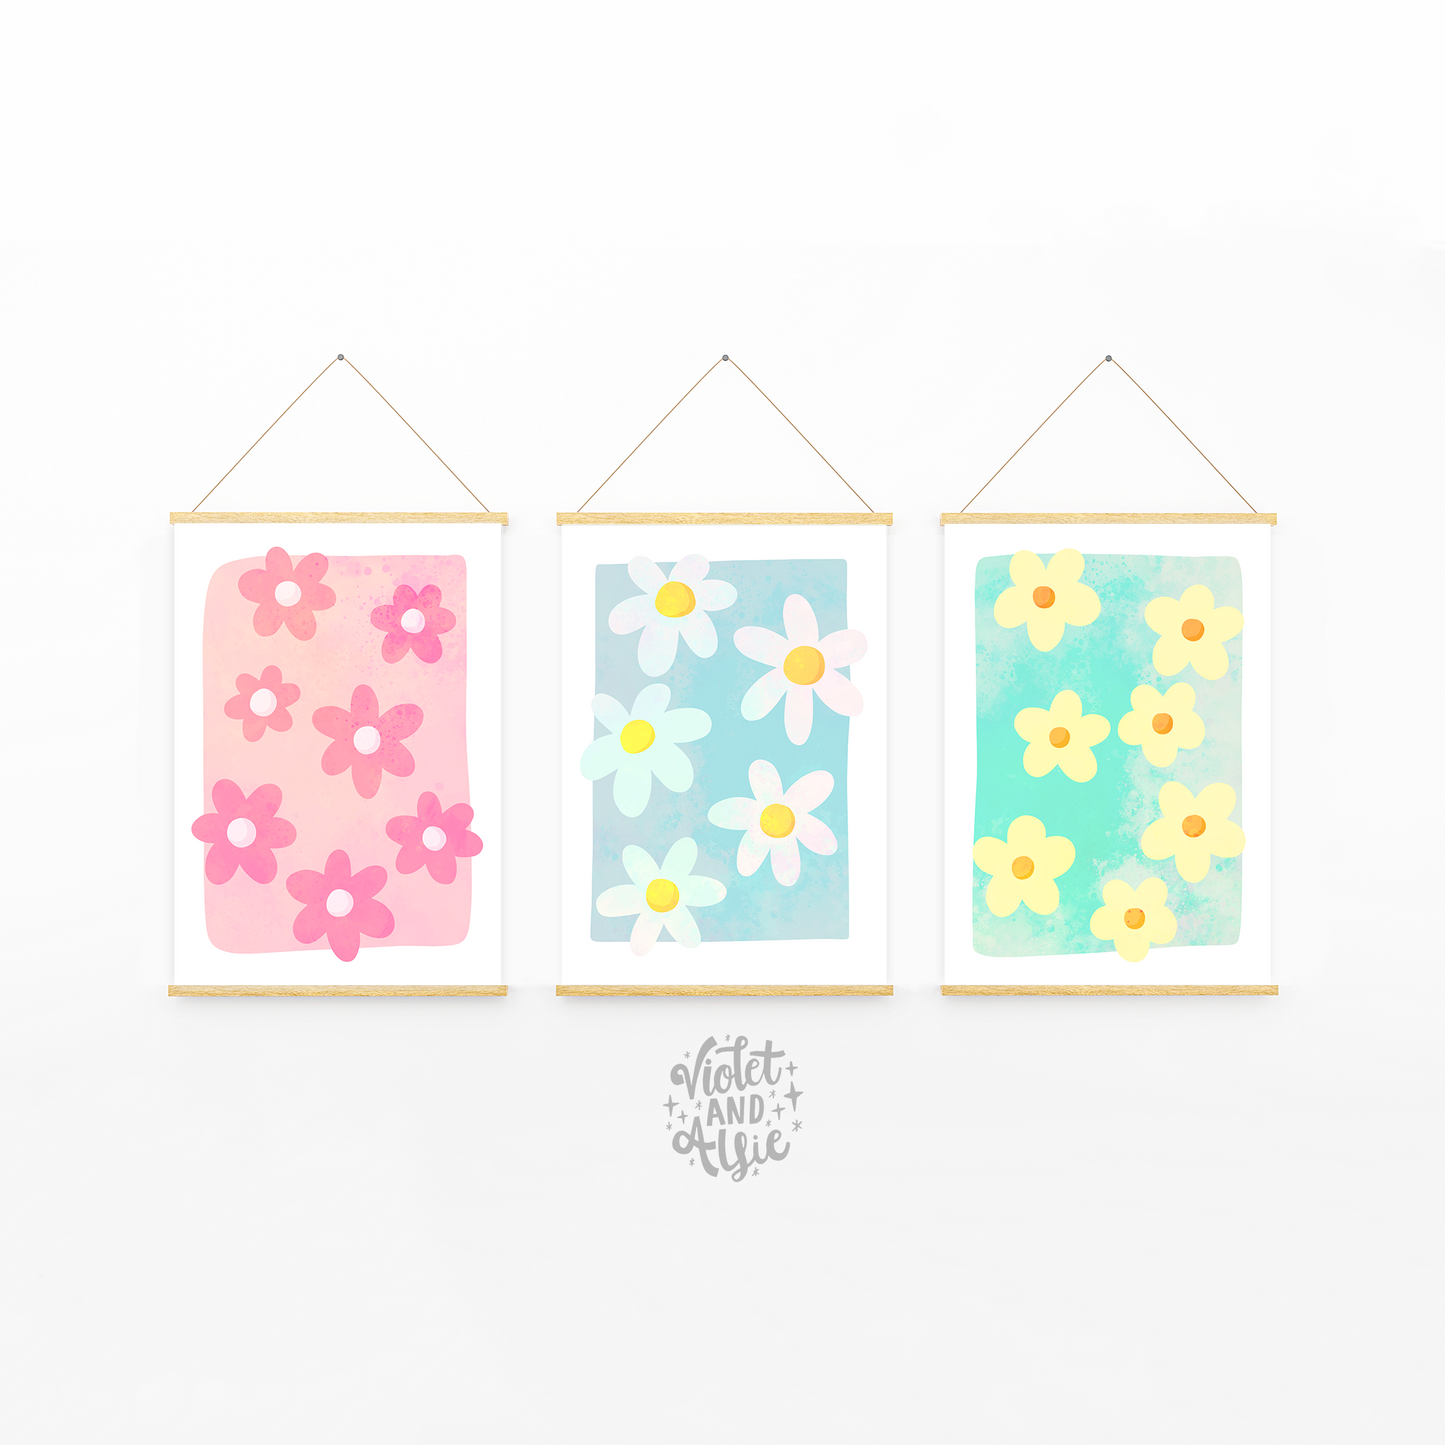 This pretty pastel set of three daisy prints adds a pop of colour and floral freshness to any space. Set of 3 Daisy Prints, Colourful Flower Wall Art, Pastel Home Decor, Daisy Prints, Simple Flower Wall Art, Pastel Colours Home Decor, botanical daisy print, flower illustration art, Bold flowers wall art, daisies poster, floral wall print, fresh summer decor, daisy flower art prints, flower market prints, colourful decor